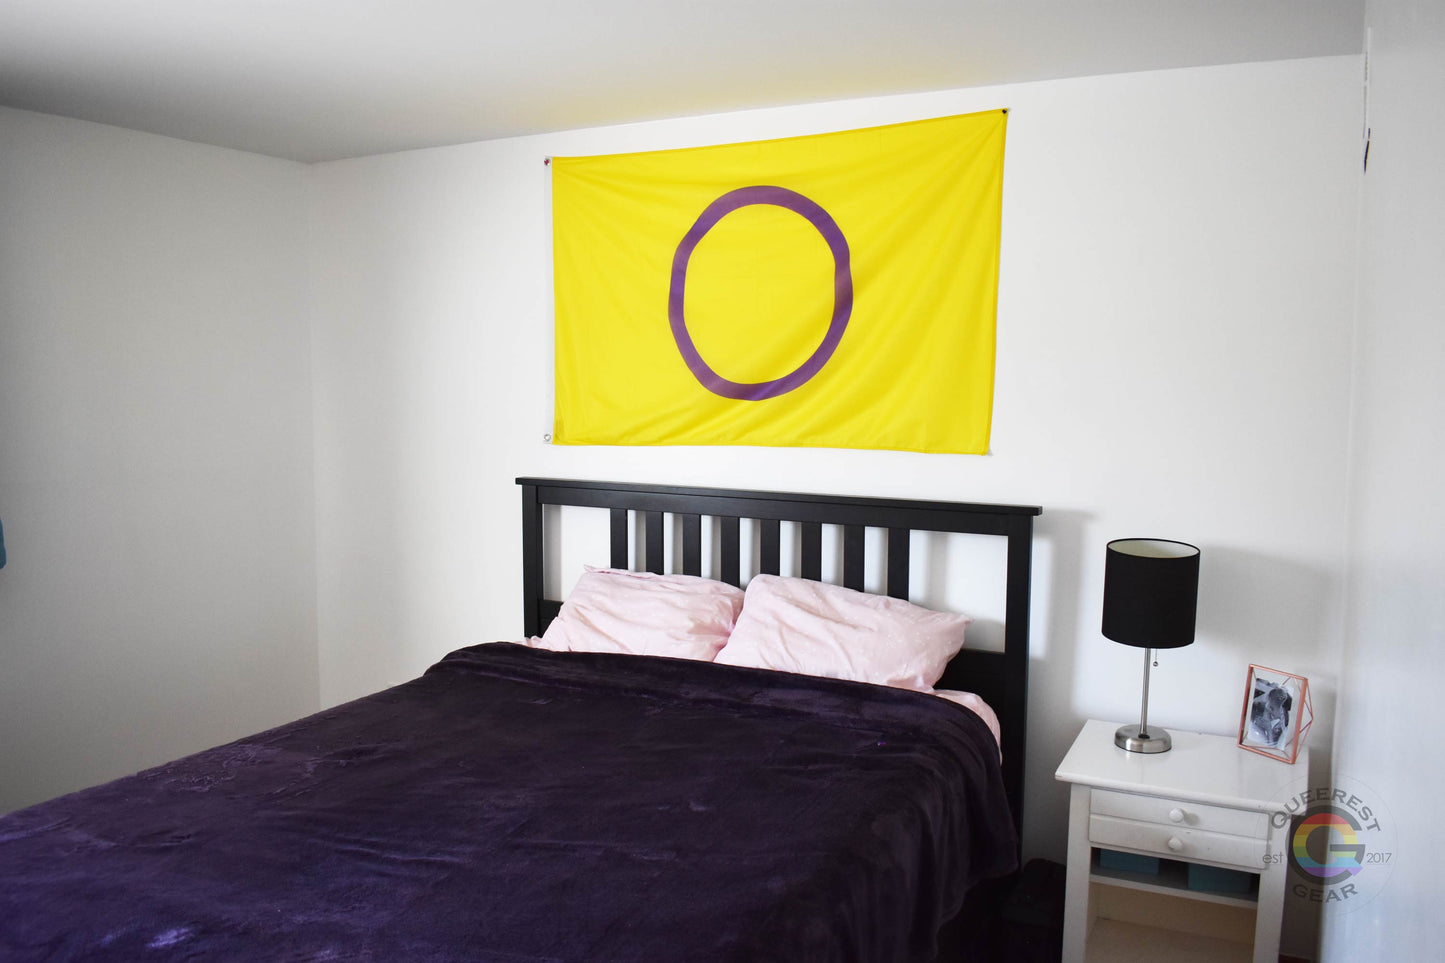 3’x5’ intersex pride flag hanging horizontally on the wall of a bedroom centered above a bed with a purple blanket